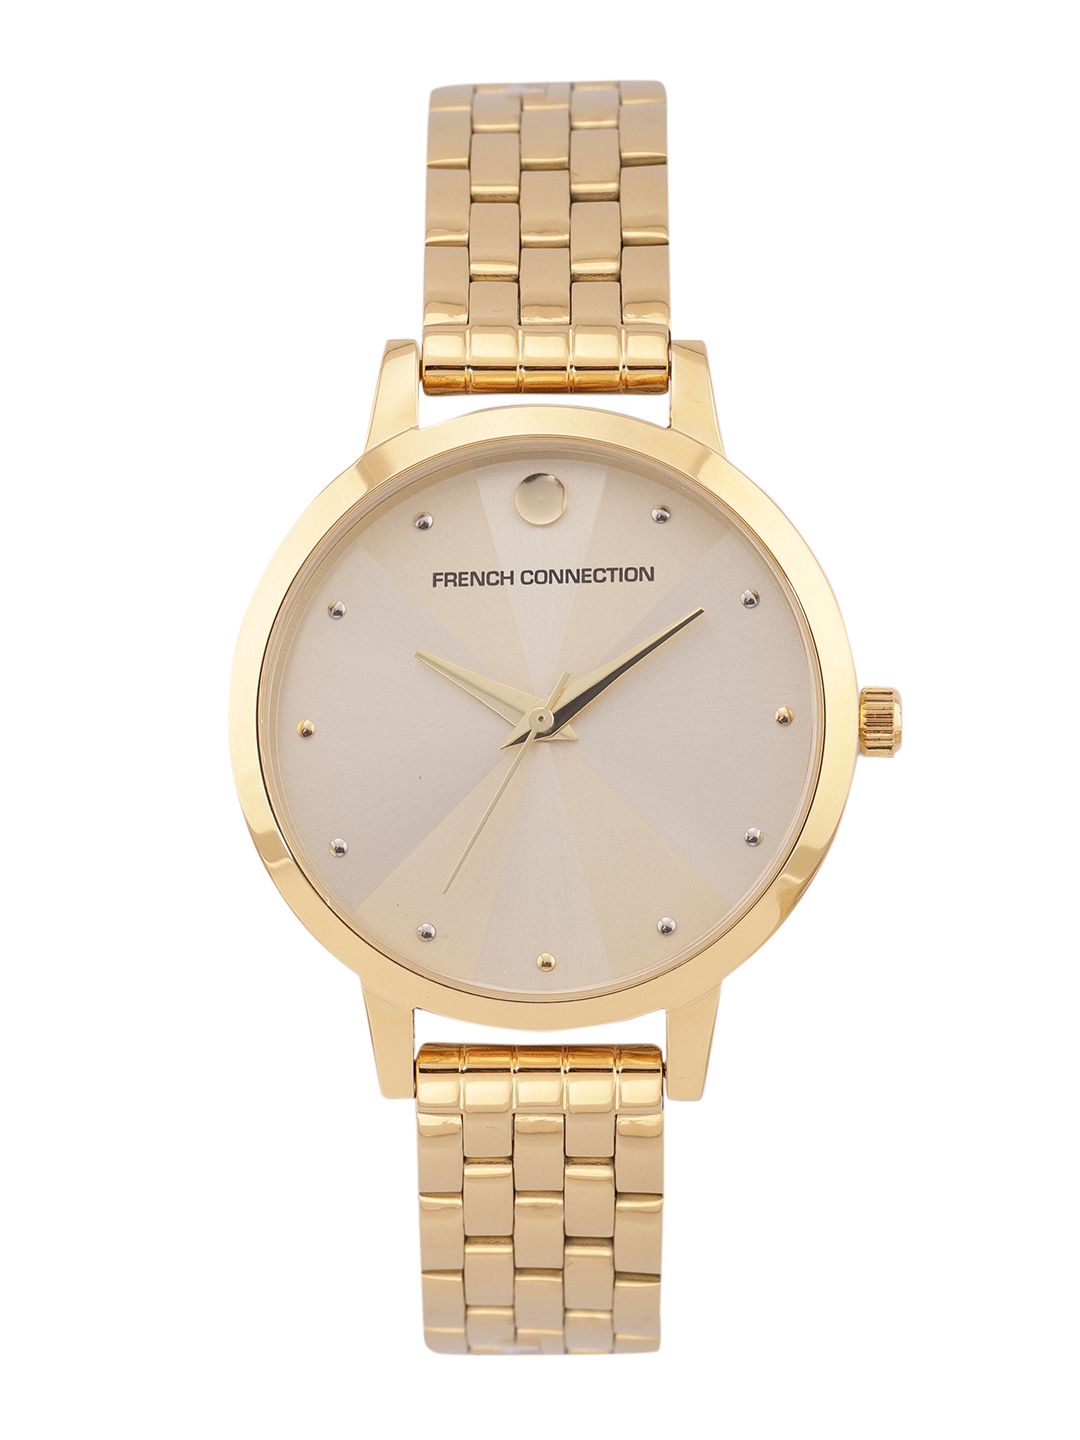 French Connection Women Gold-Toned Analogue Watch FCN00017C Price in India